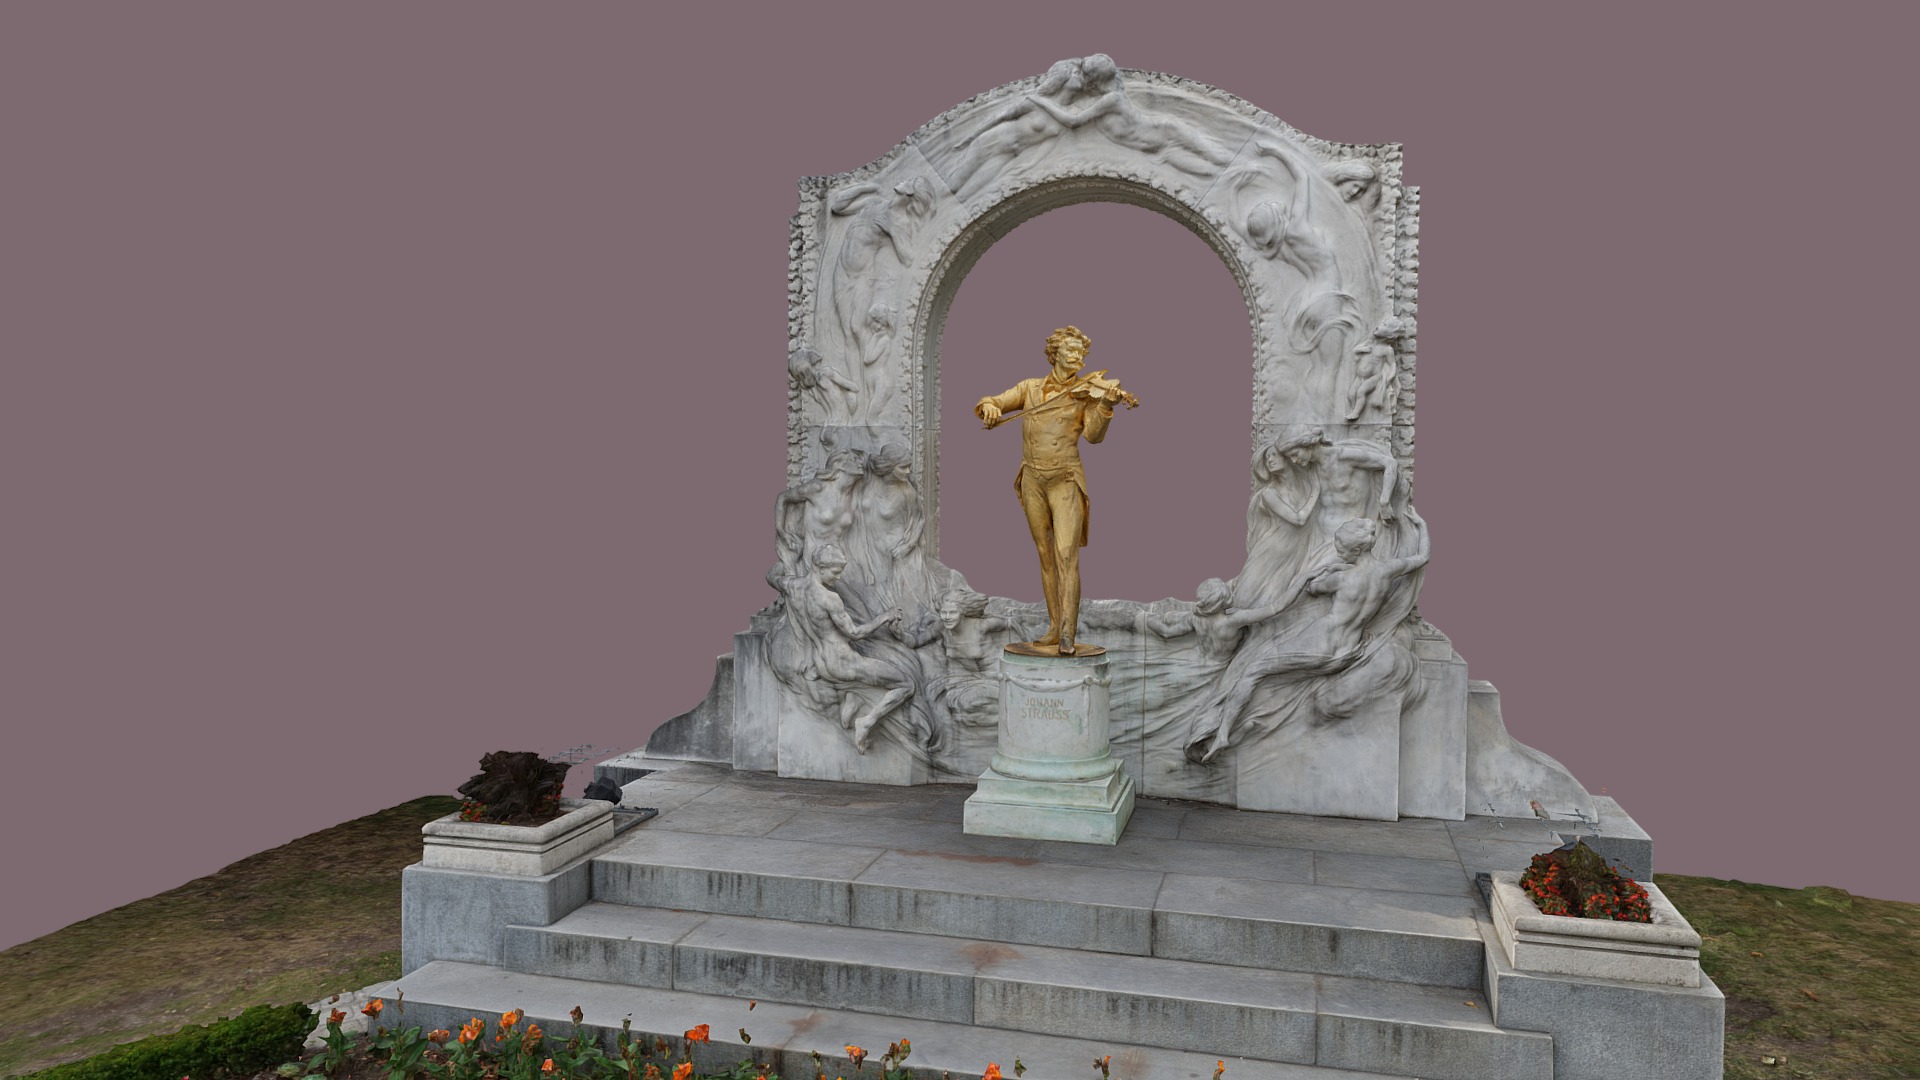 3D model Johann Strauss - This is a 3D model of the Johann Strauss. The 3D model is about a statue of a person holding a cross on a stone pedestal.